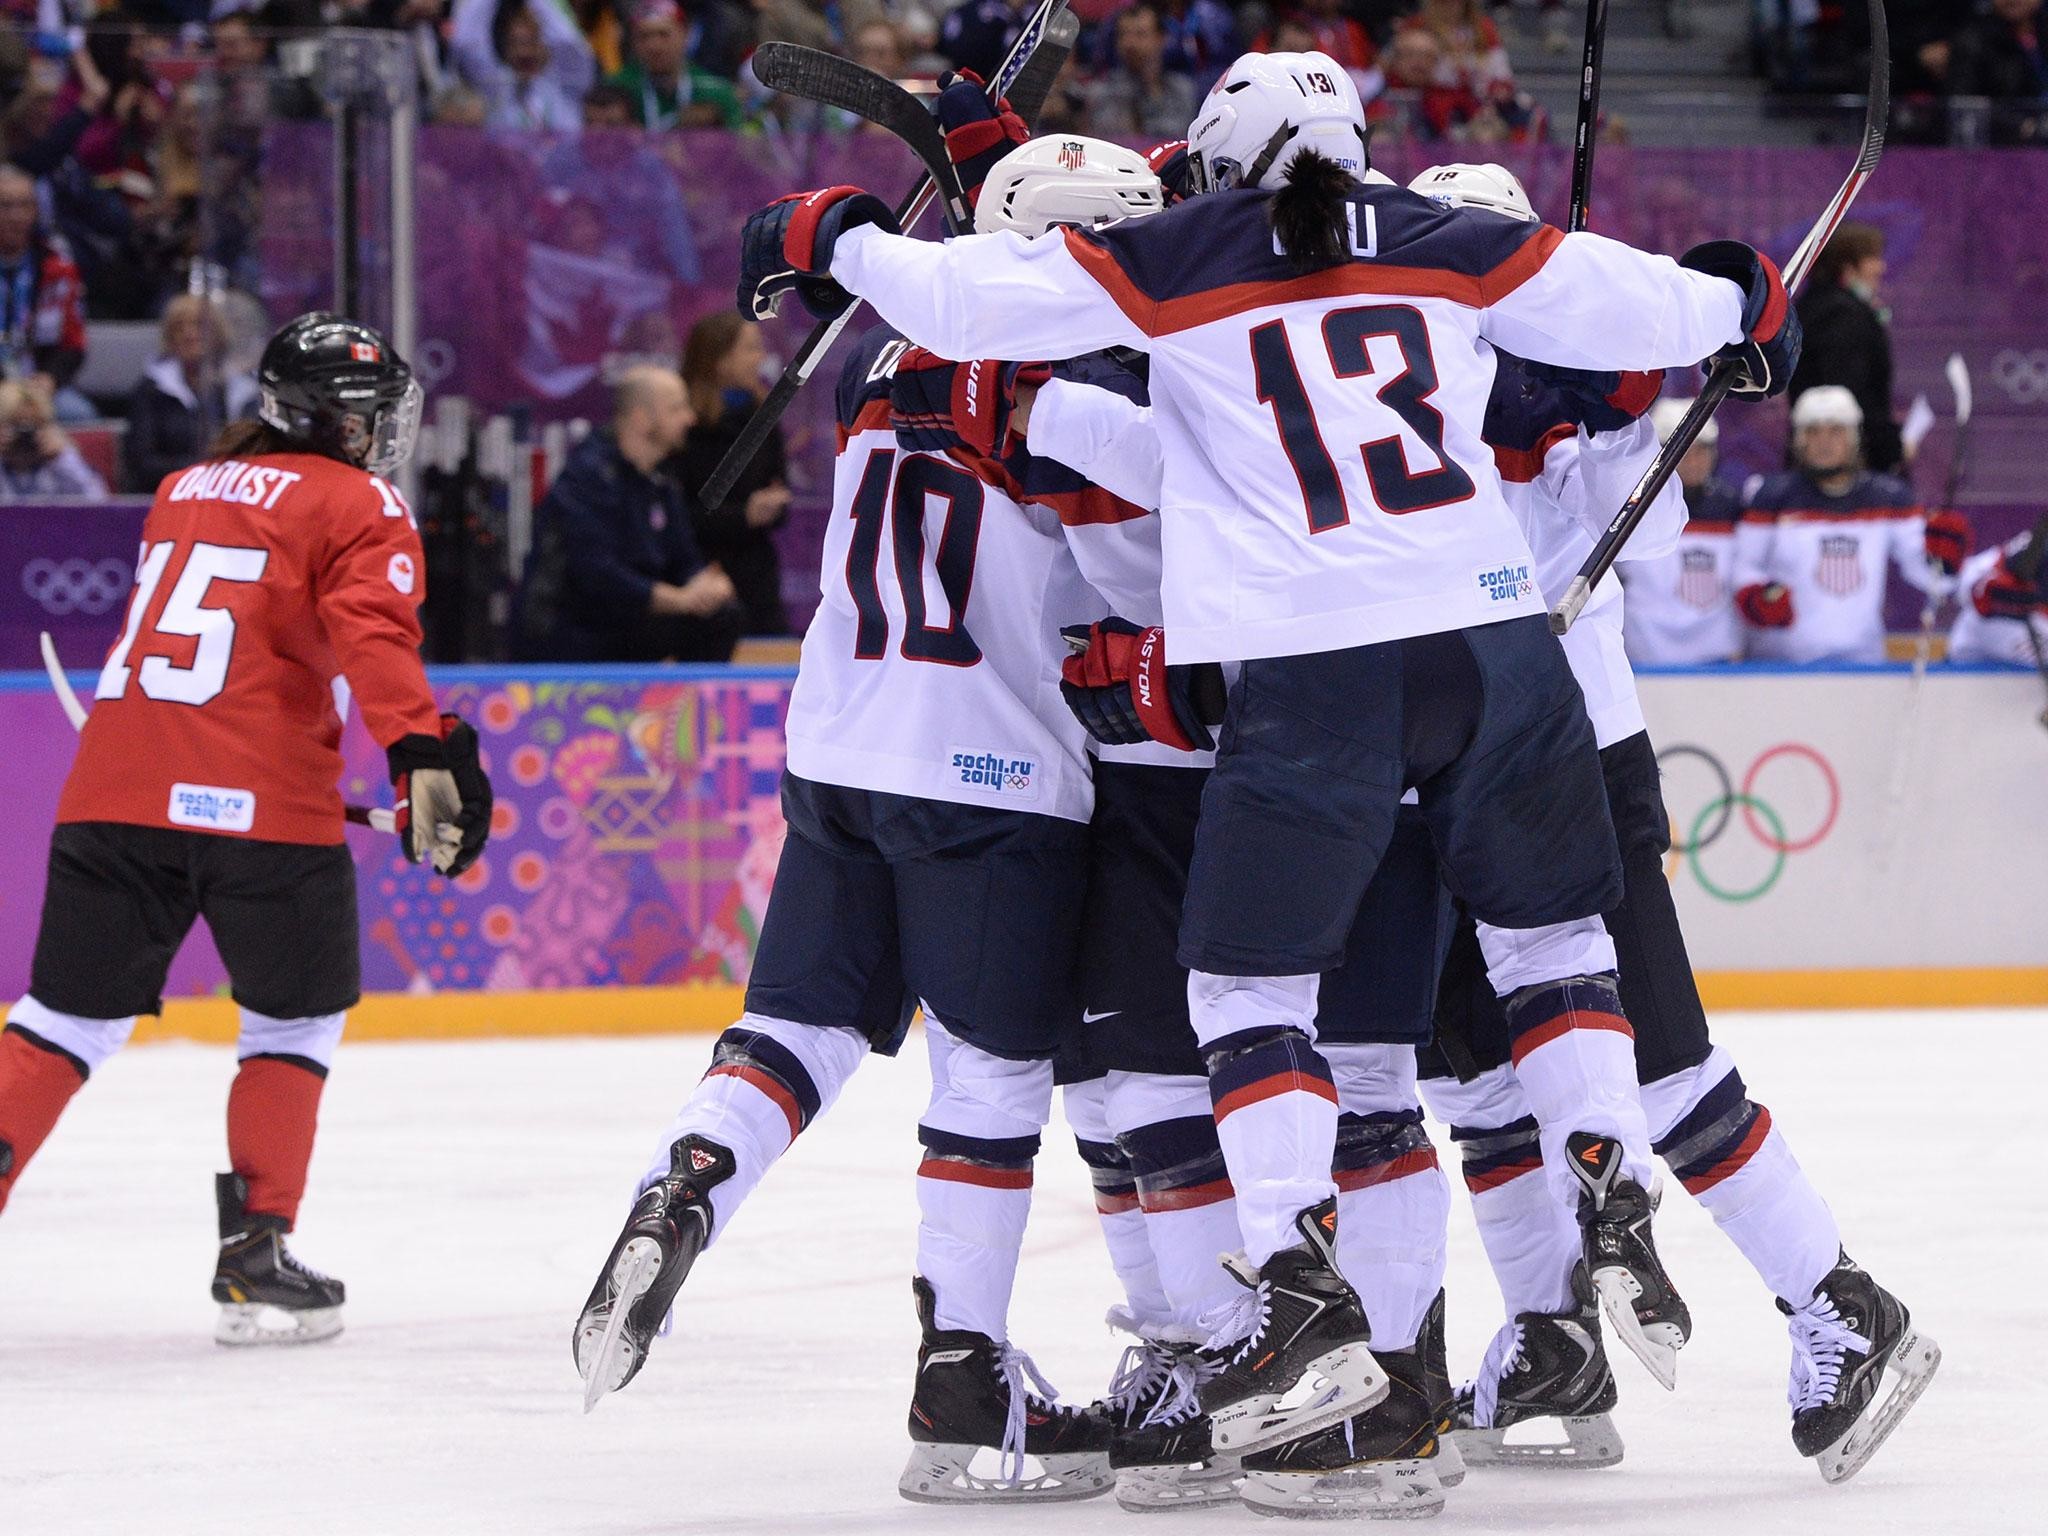 2048x1536 USA women's hockey team agree deal over pay dispute to avoid boycott of  world championships | The Independent